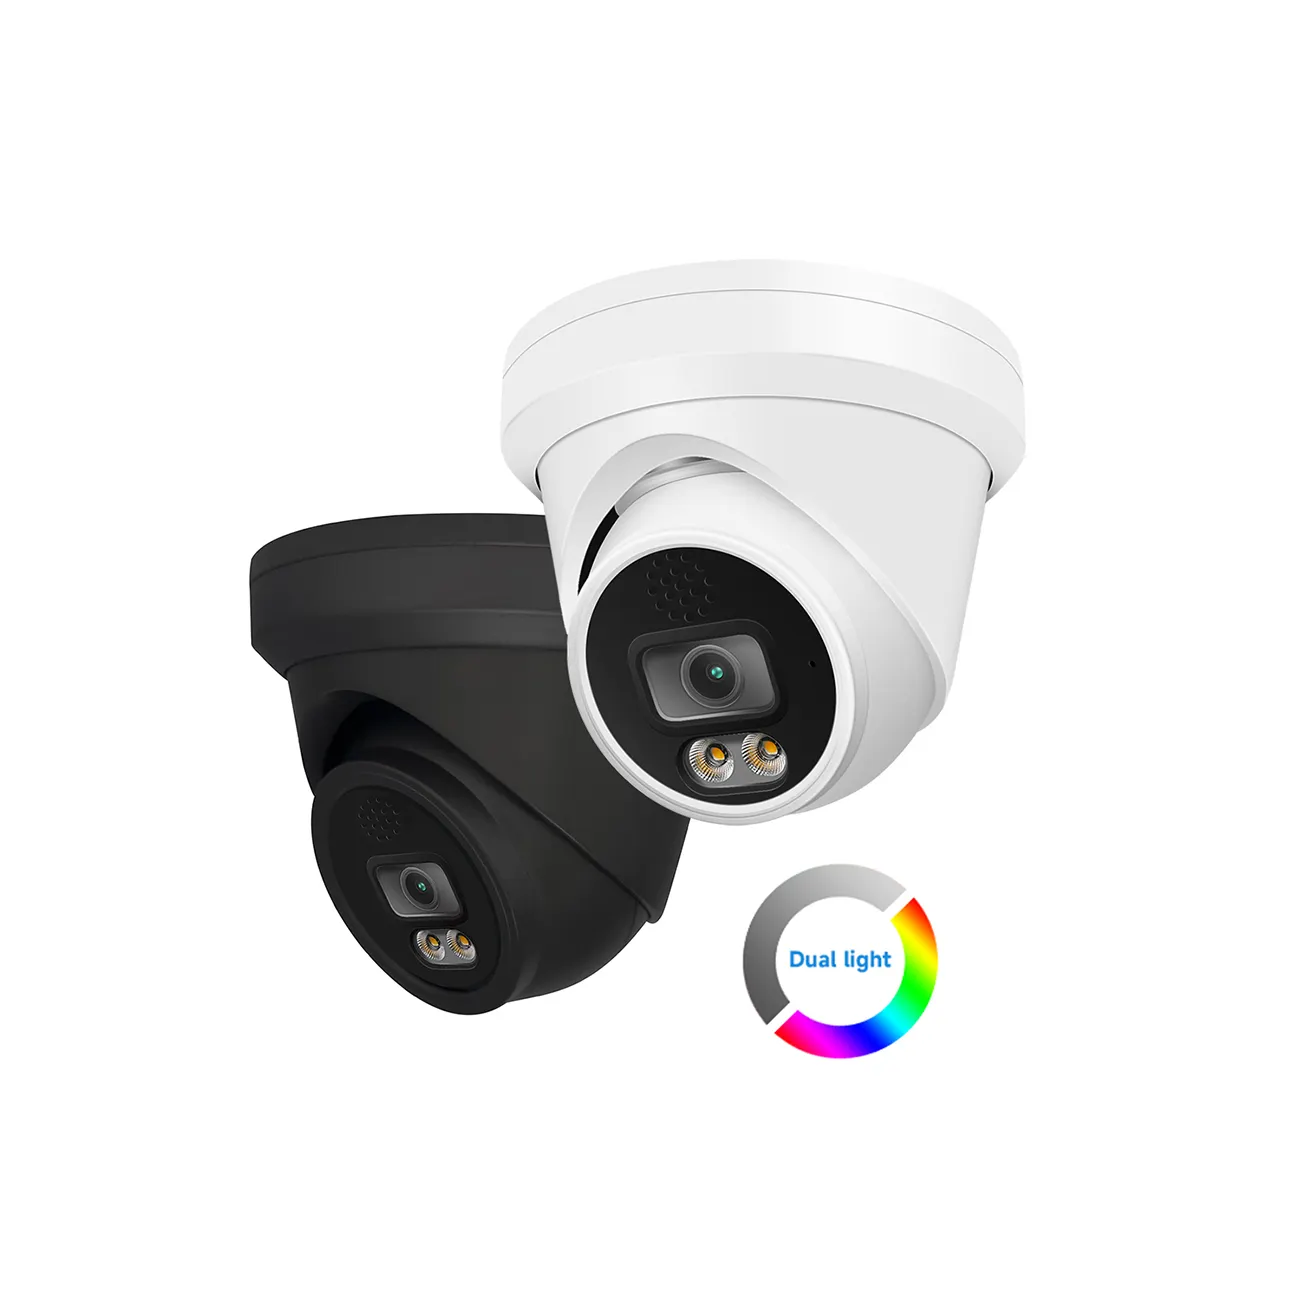 4K Ultra HD Active Deterrence Turret IP Security Camera Smart Dual Illumination 24/7 Colorful Two Way Audio Sound Alarm SD Slot